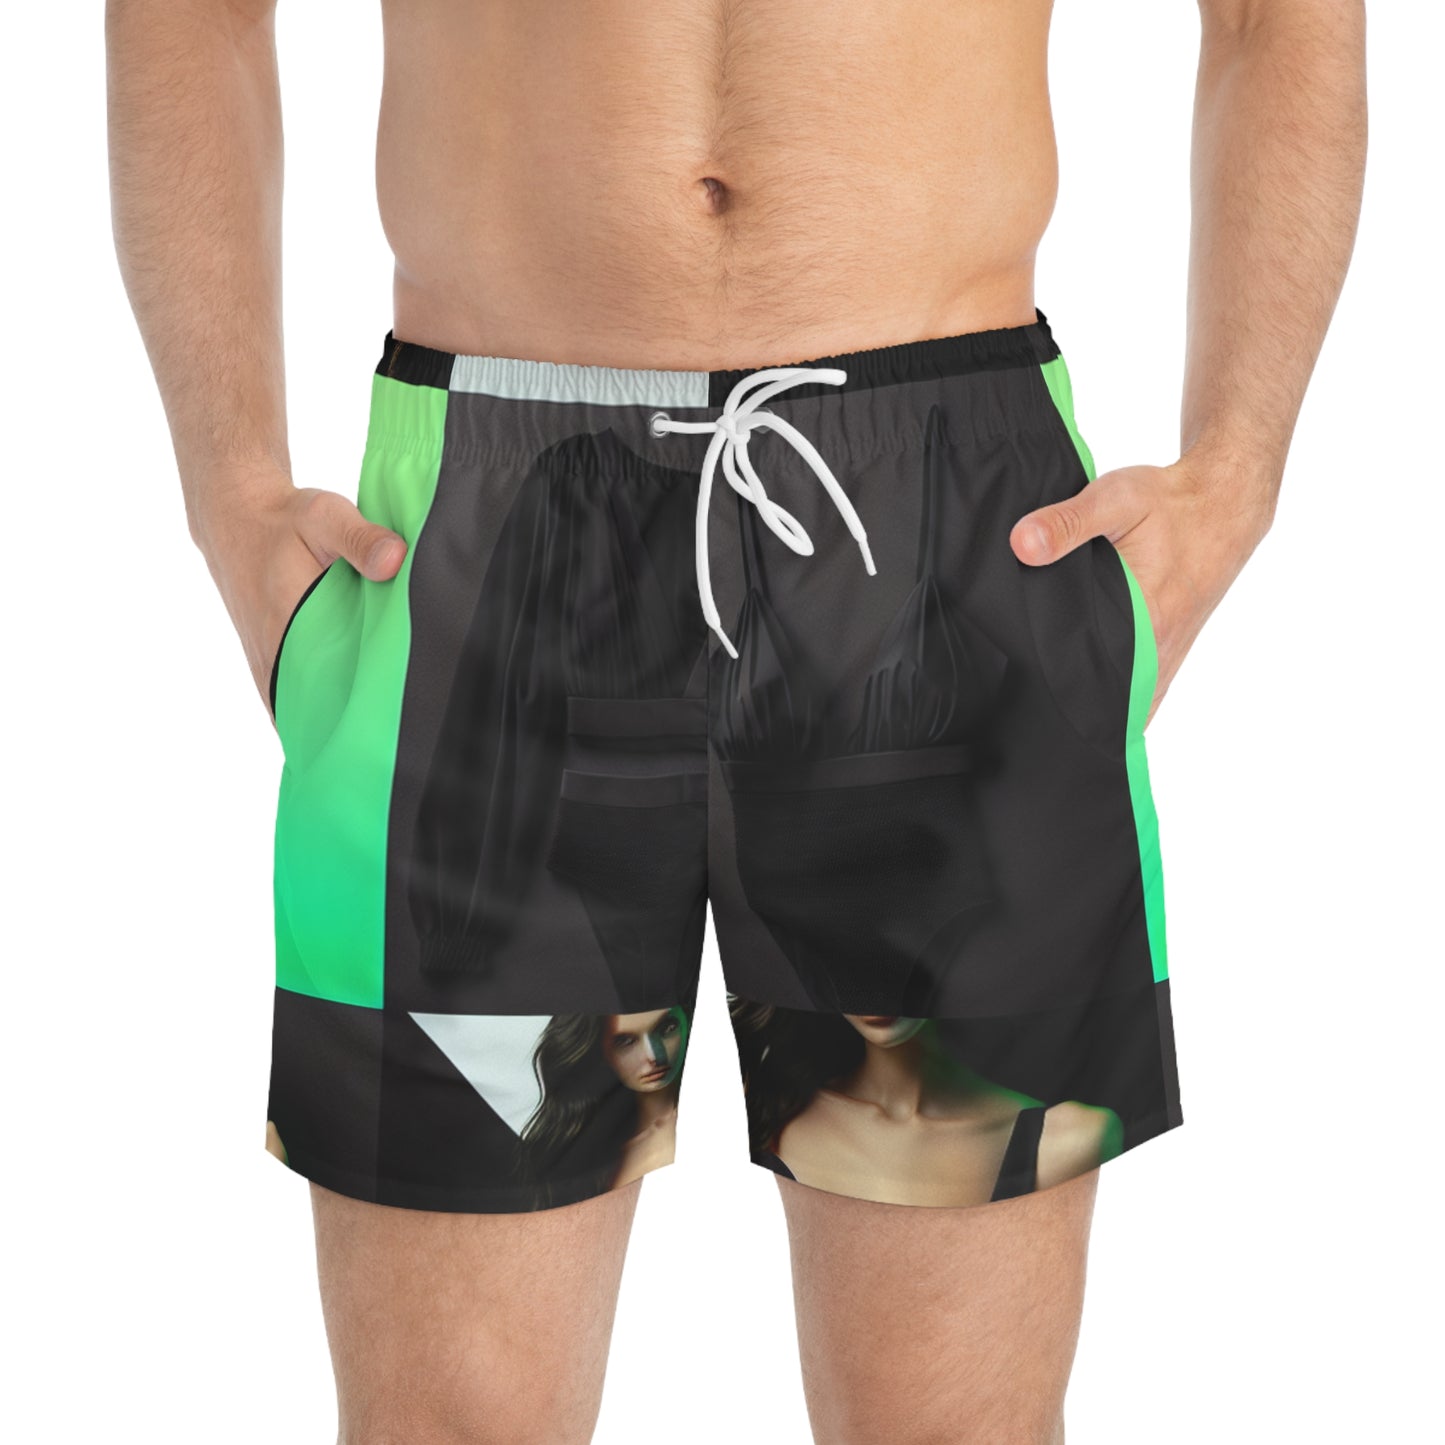 "Unleash your inner aquatic adventurer with our exquisite Peskoi swim trunks. Immaculately crafted in varying hues of sleek black, - Swim Trunks